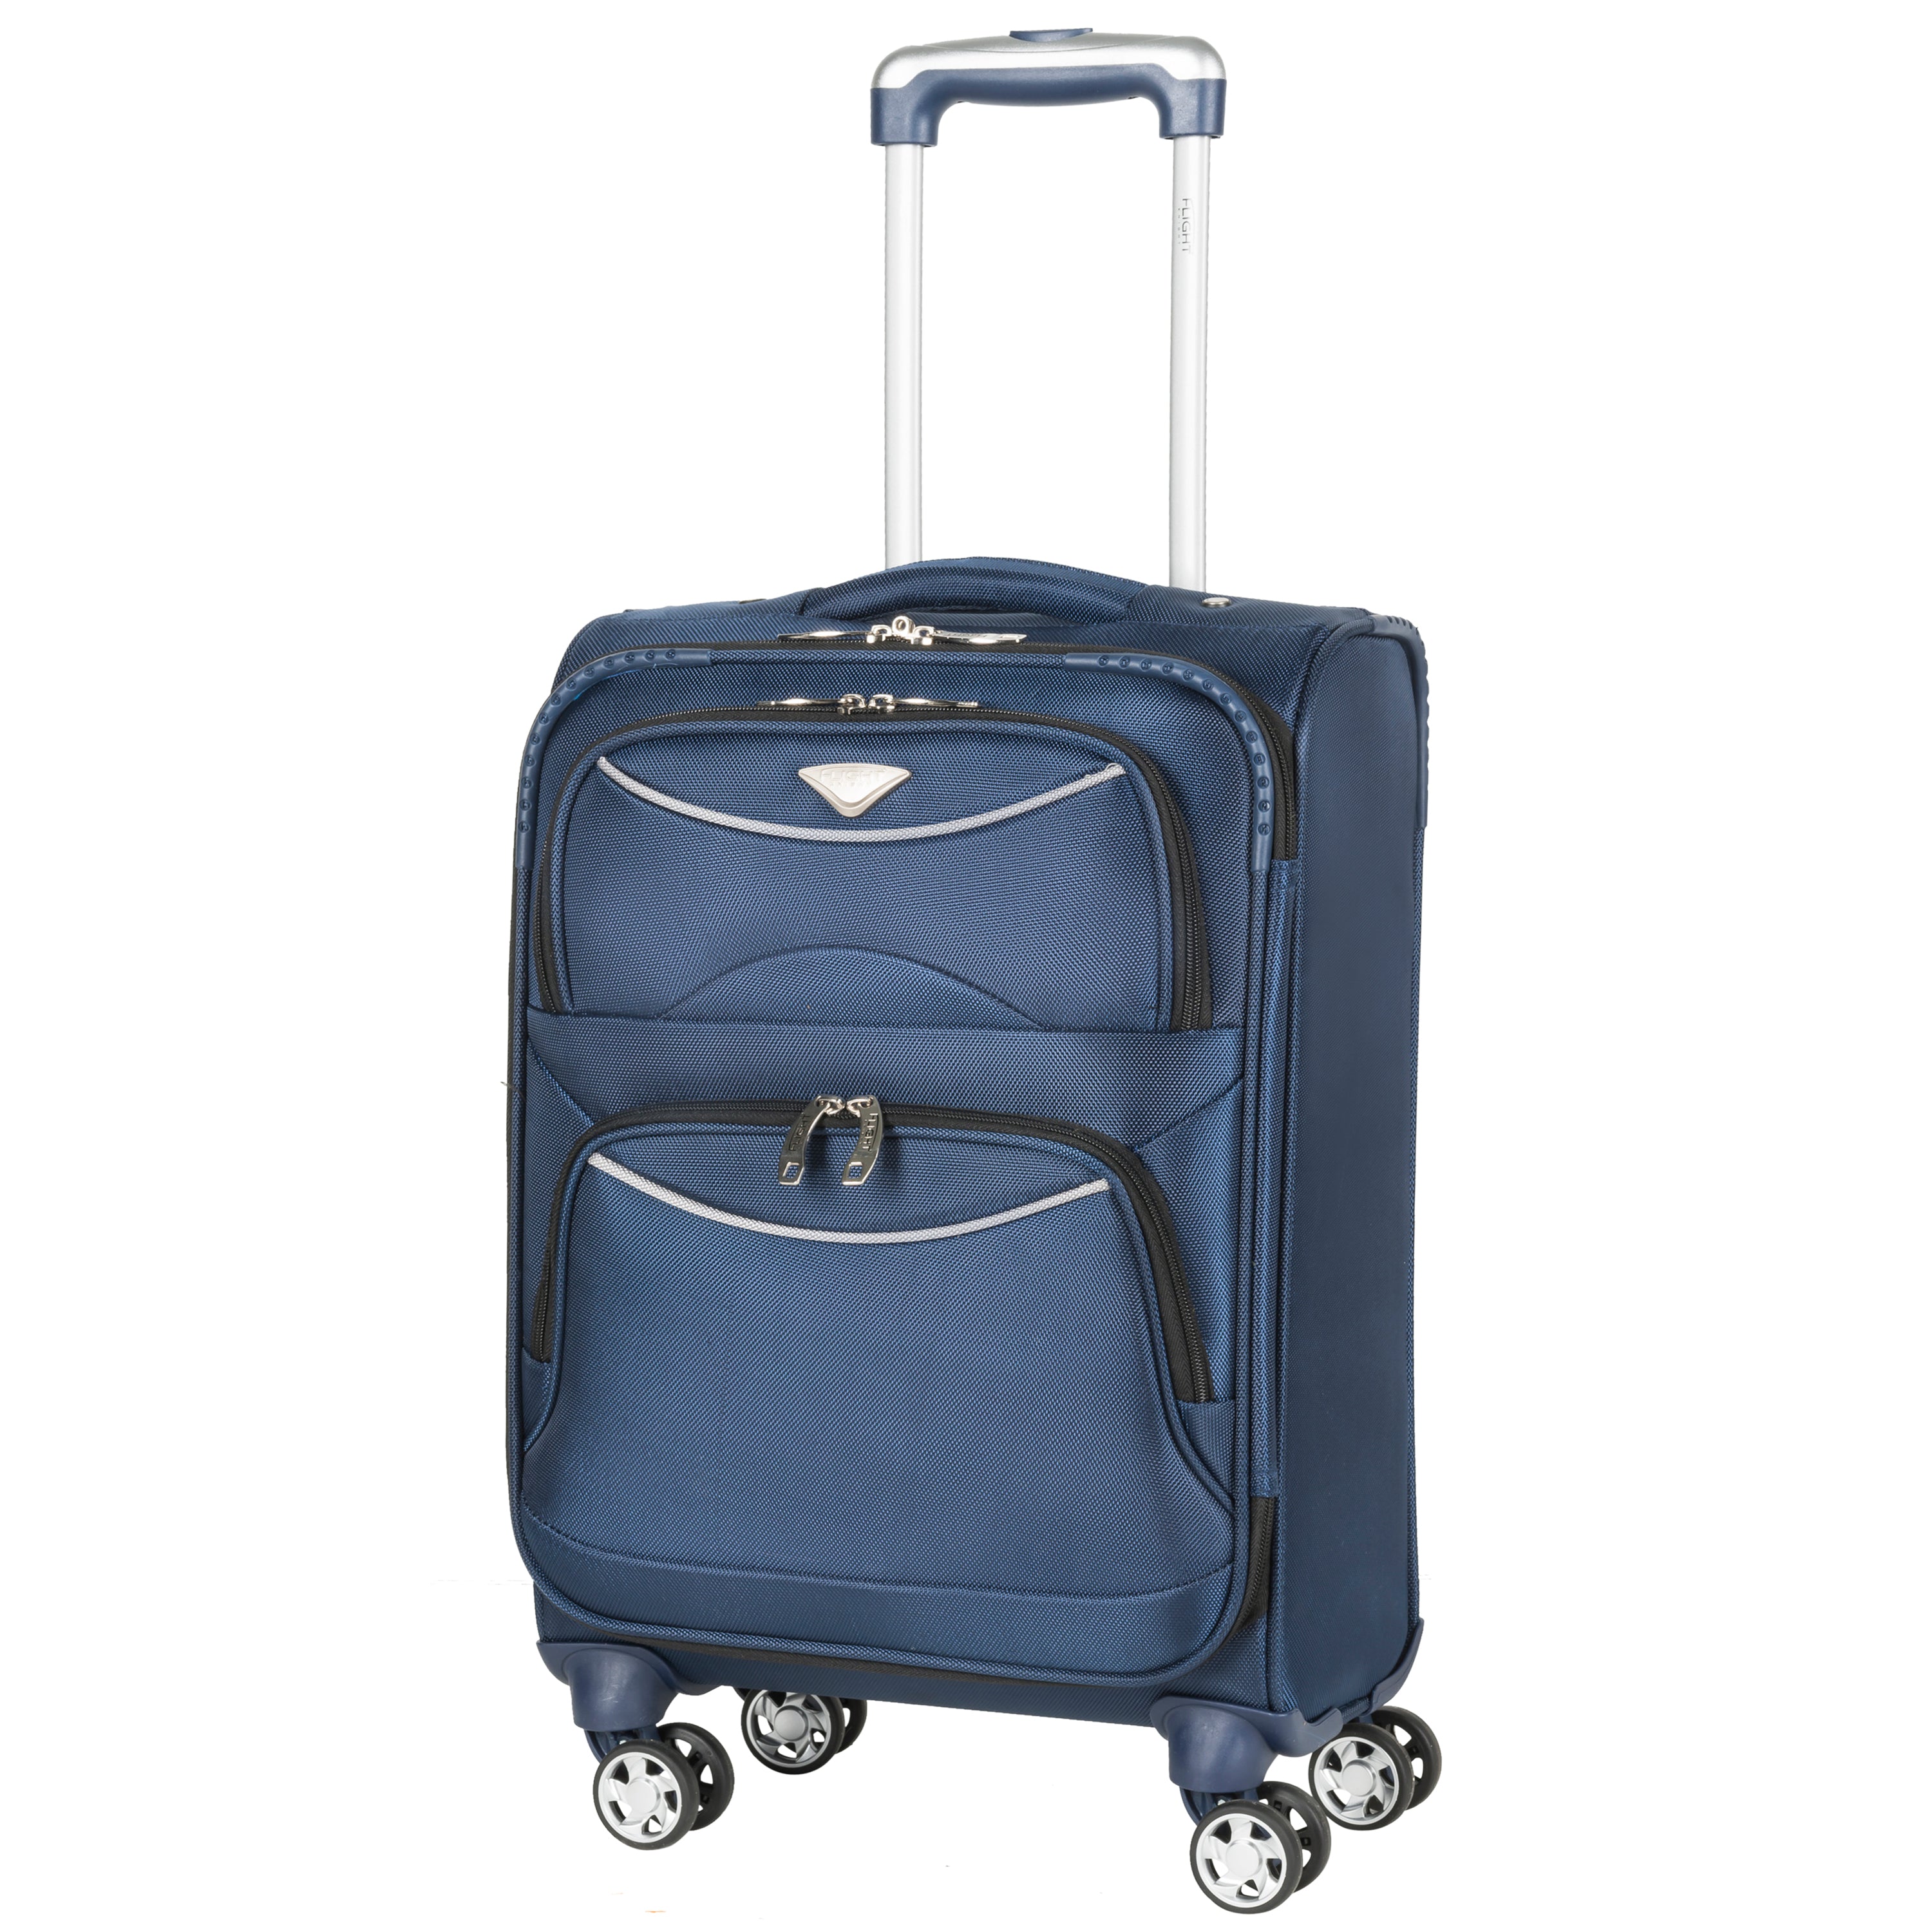 Load image into Gallery viewer, Polyester Soft Case Cabin Suitcases Hold Luggage Delta Maximum Easyjet Approved
